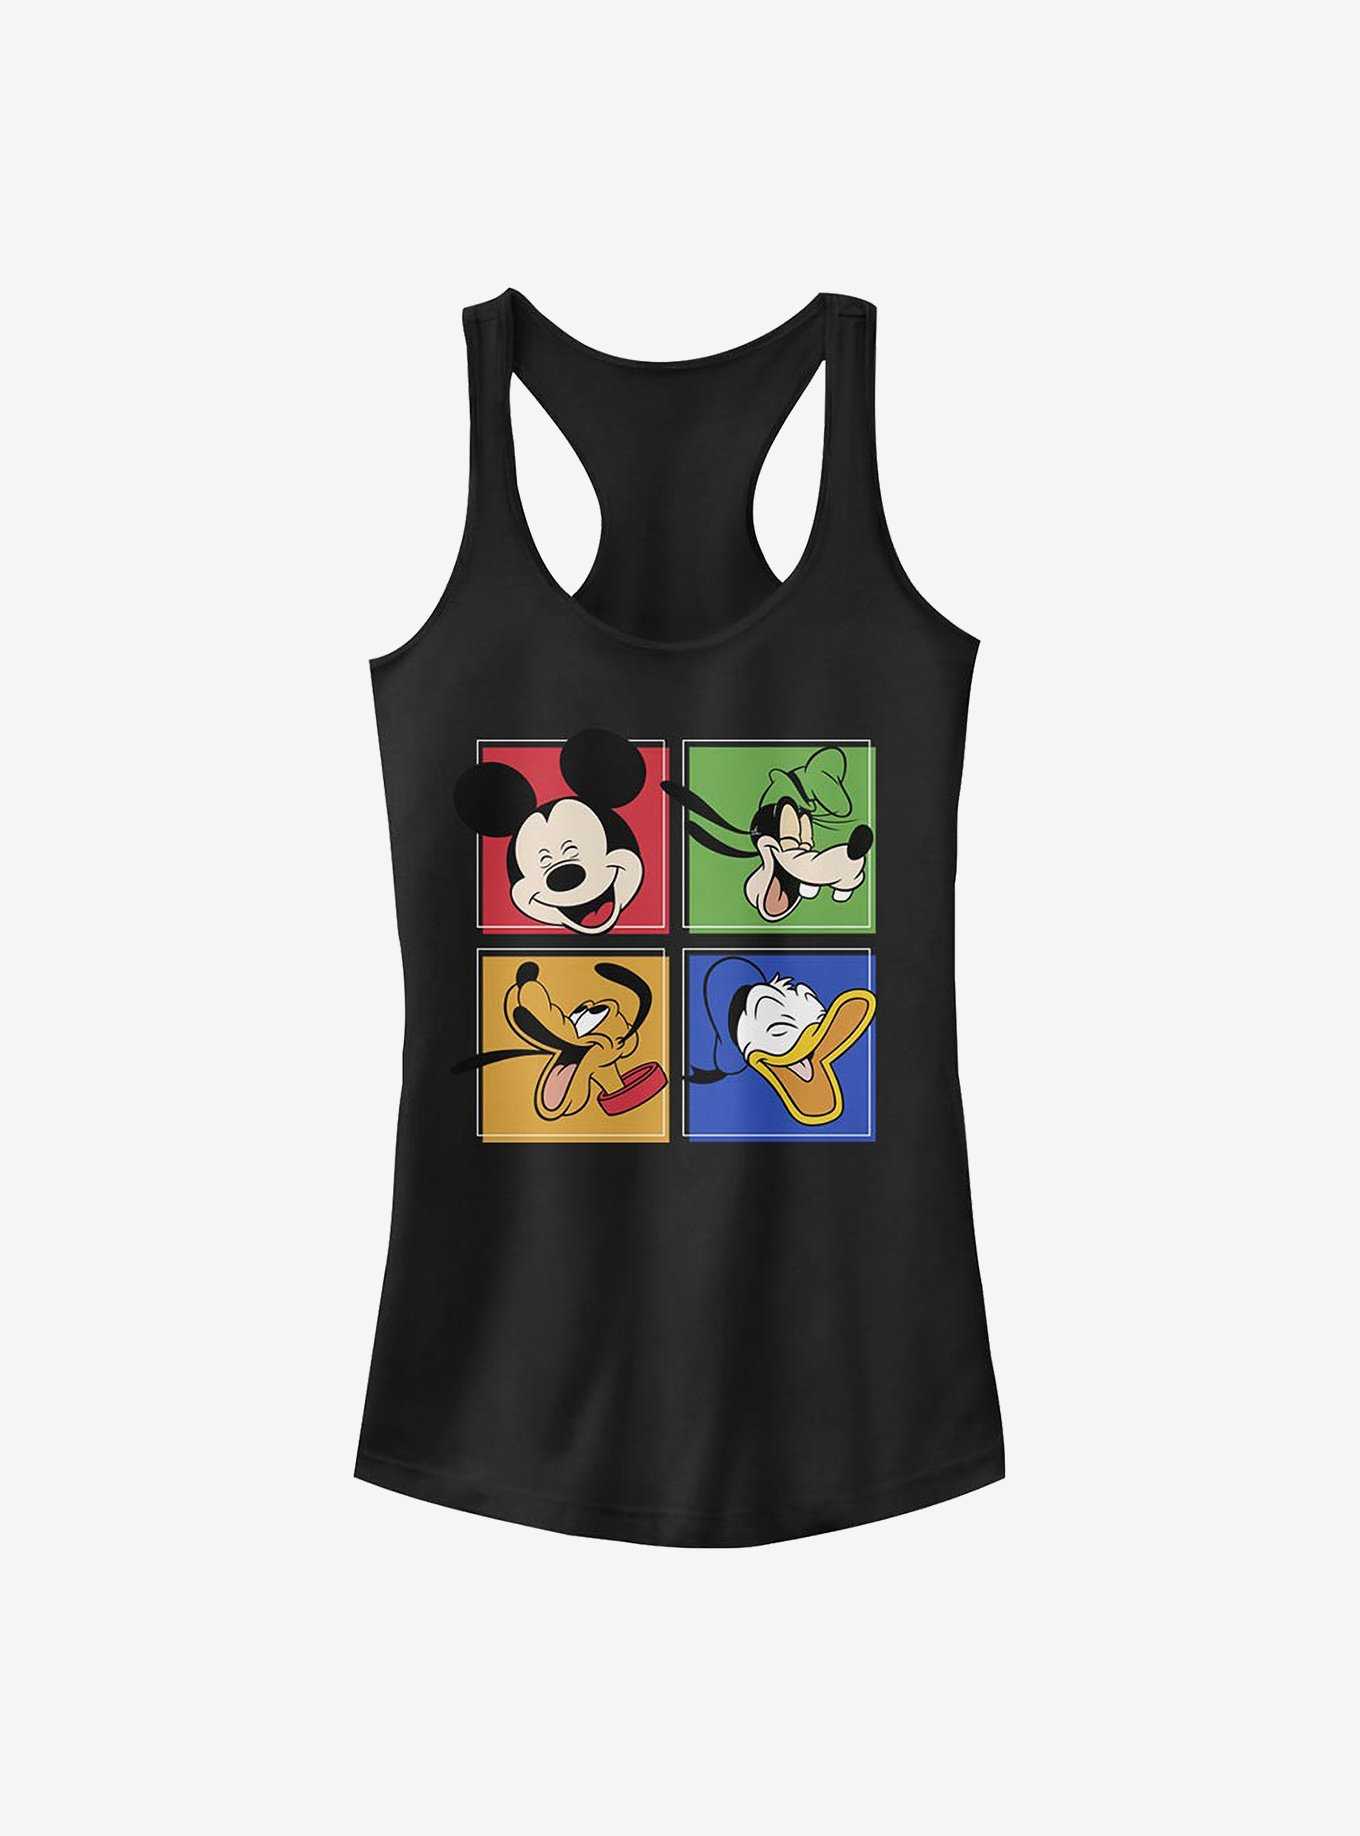 Disney Mickey Mouse Mickey And Friends Girls Tank, , hi-res